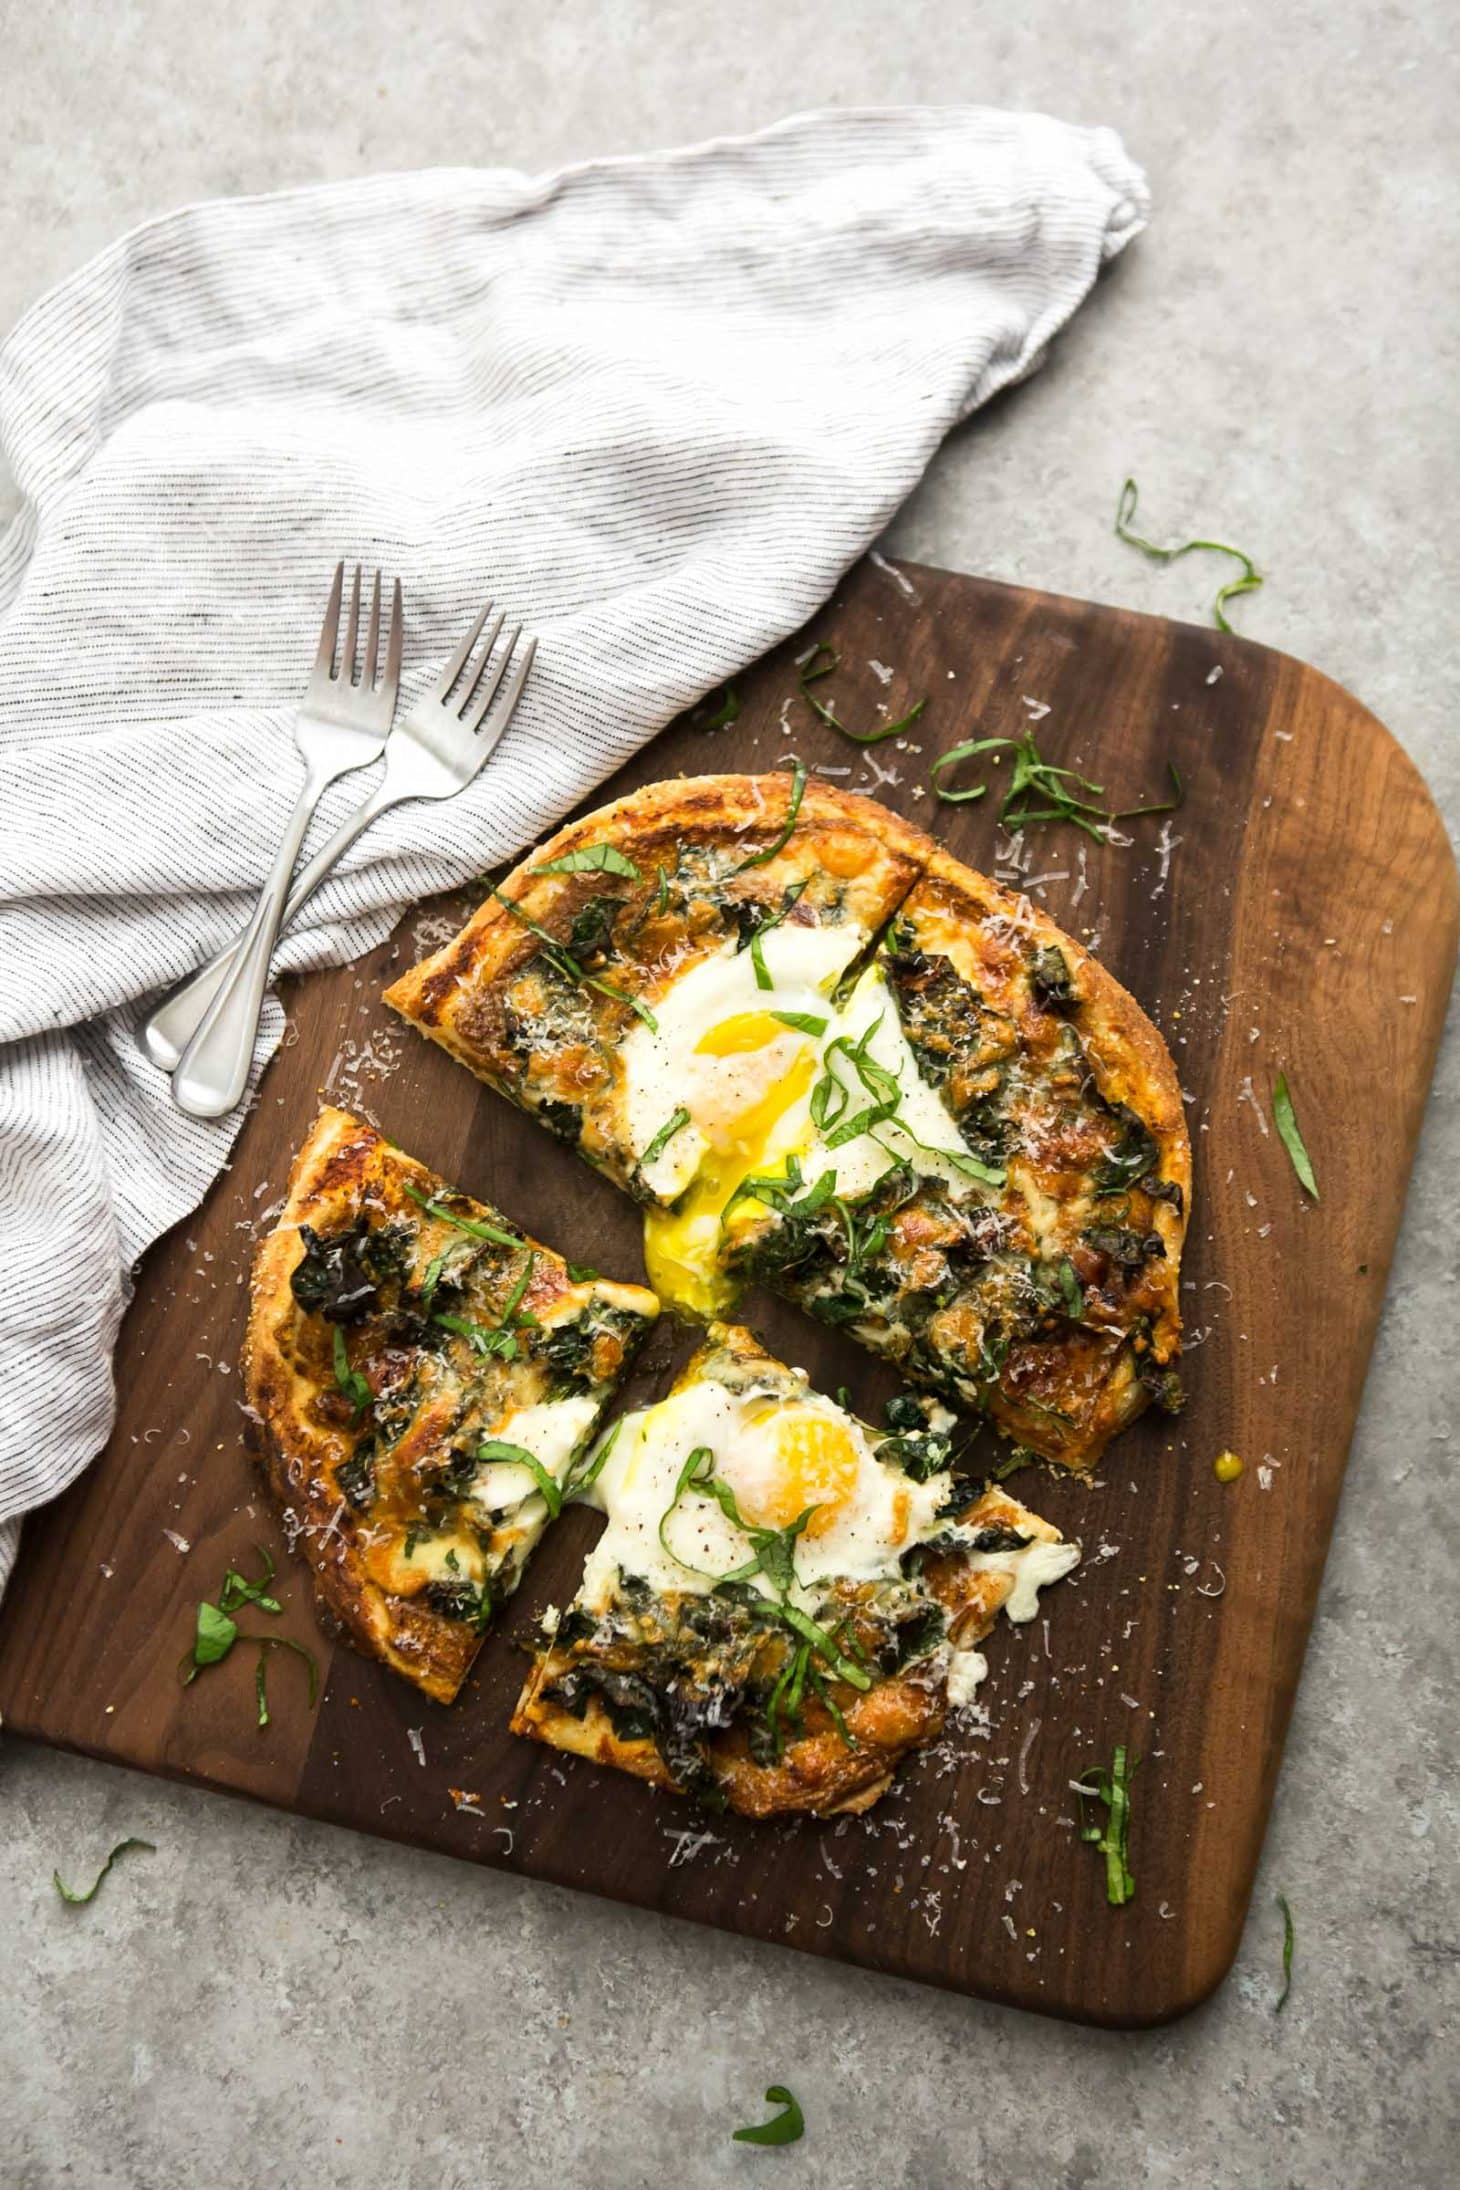 Garlicky Kale Pizza with Eggs and Homemade Tomato Sauce | @naturallyella